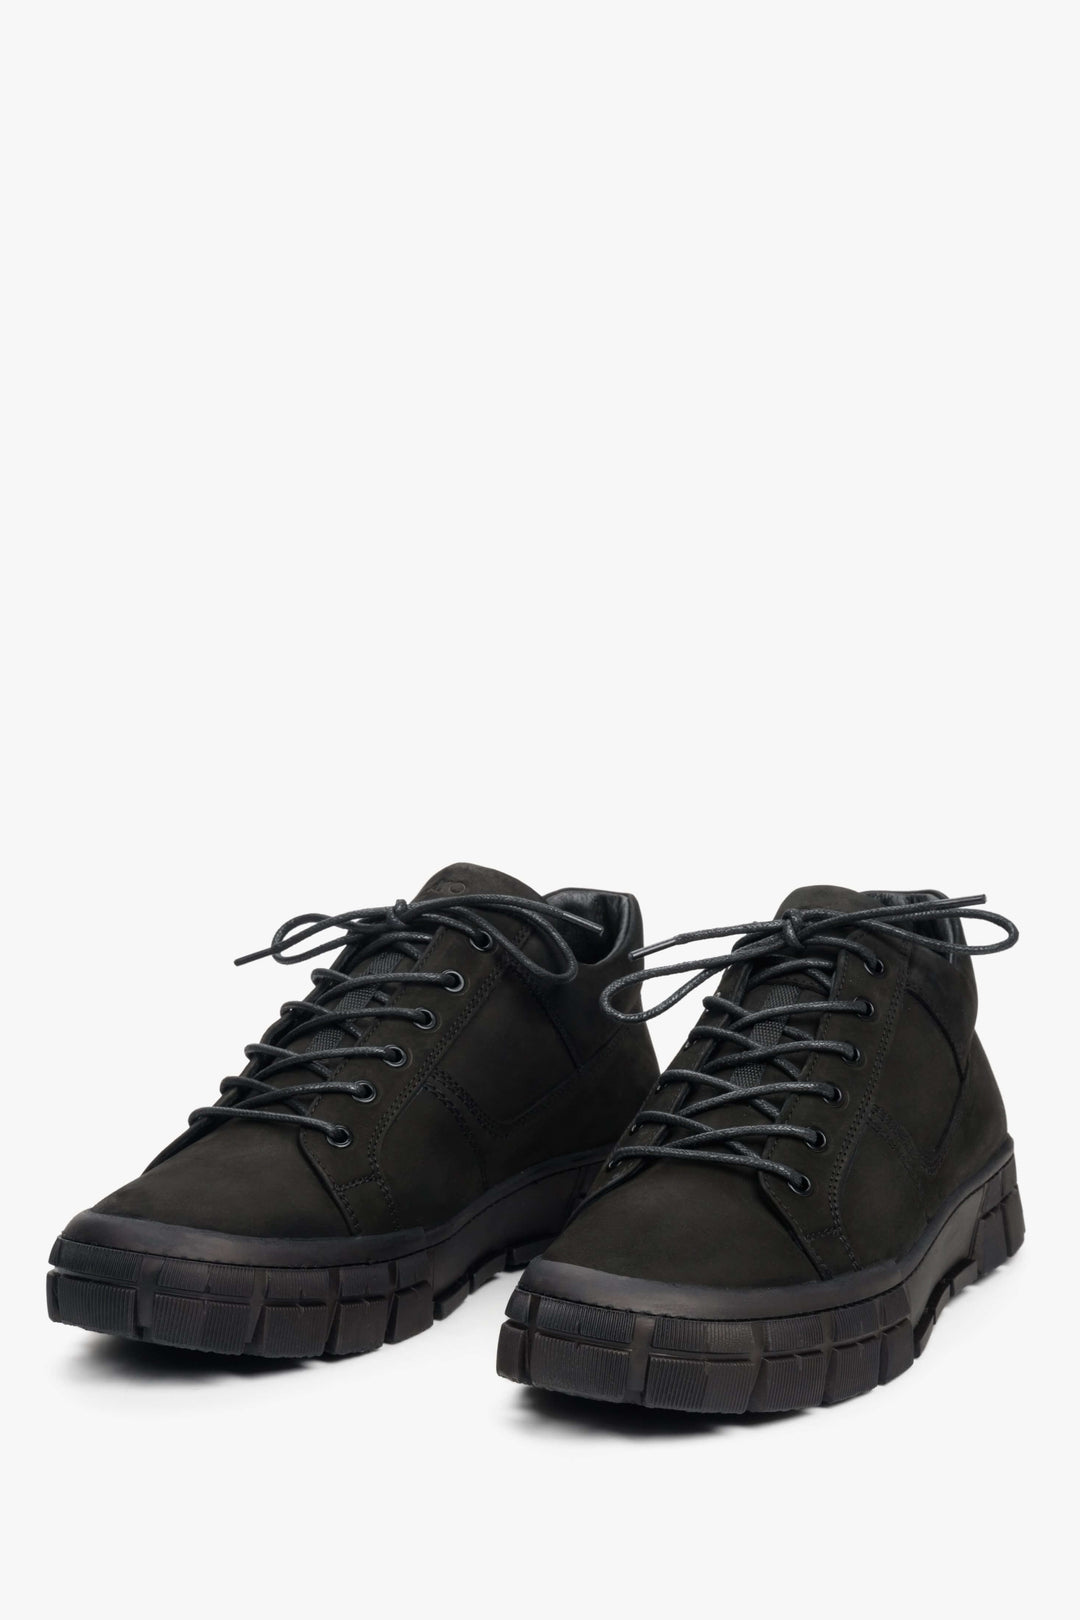 Men's lace-up shoes made of natural nubuck leather in black Estro.